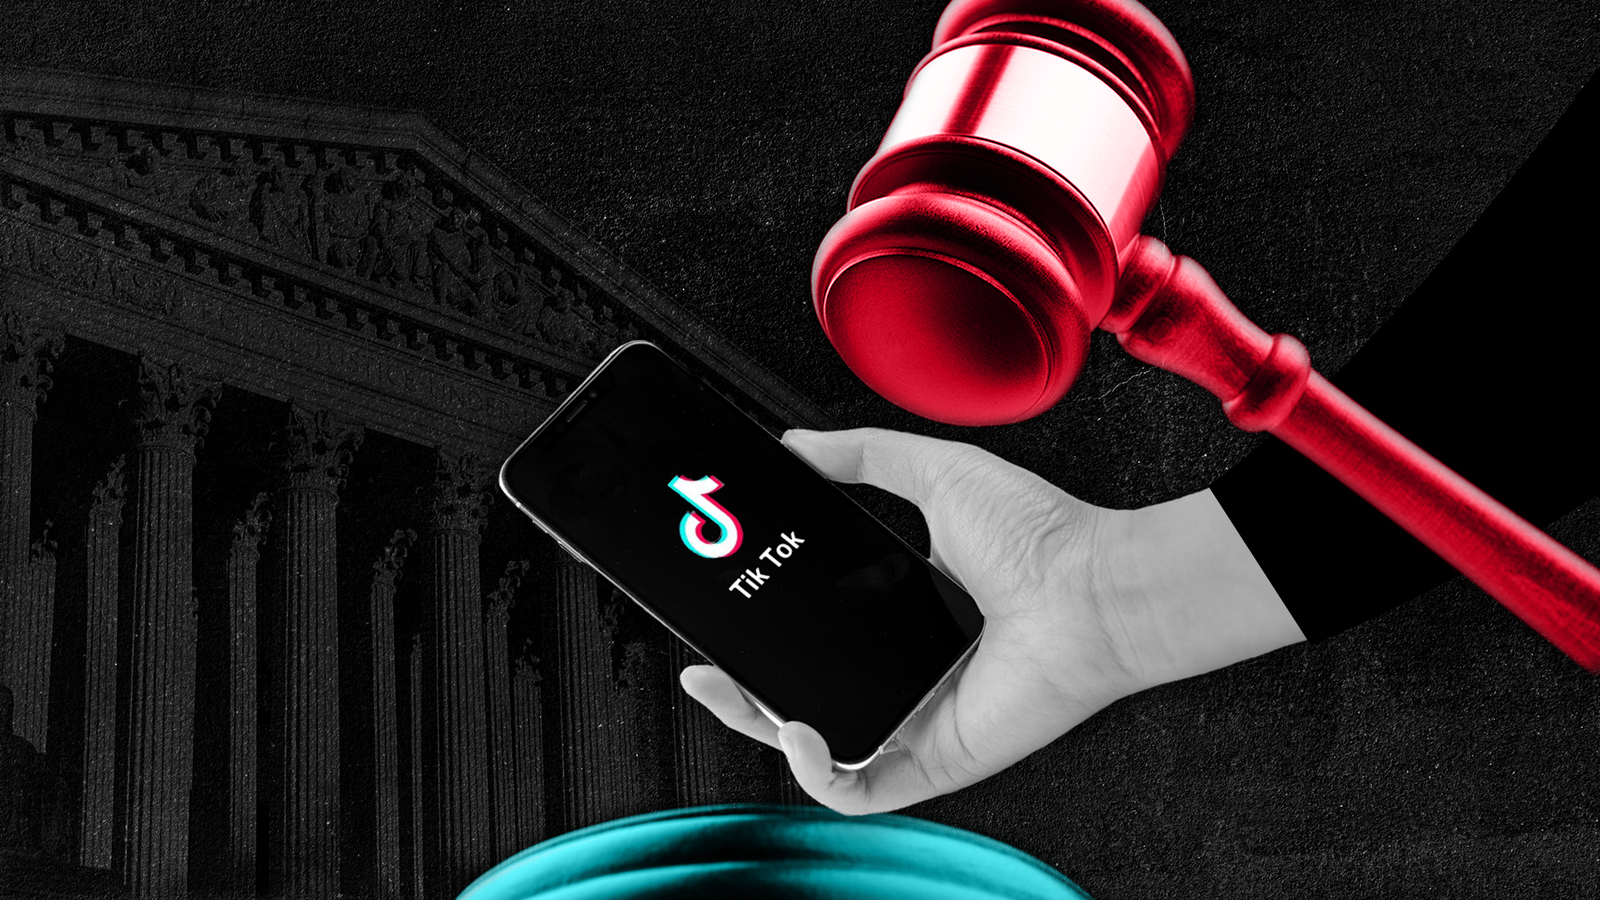 TikTok: Would the US really ban one of the world's most popular apps?